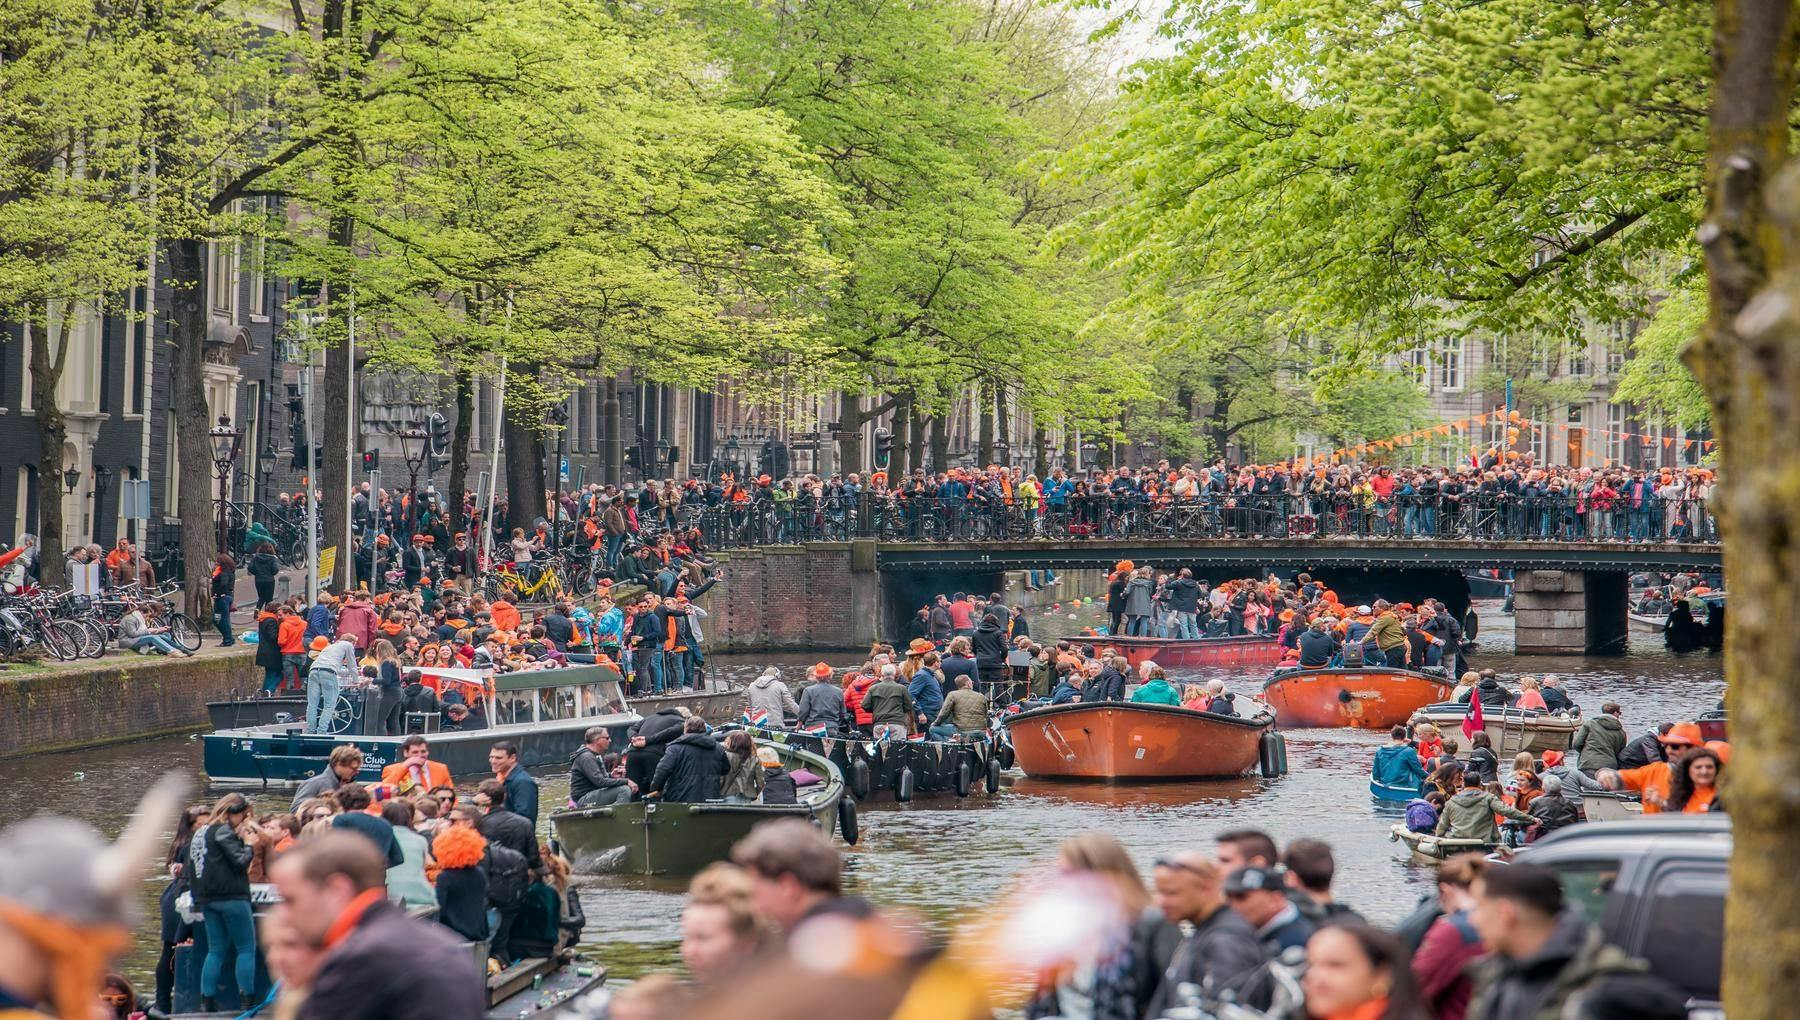 Koningsdag or King's Day is a national holiday in the Kingdom of the Netherlands. Celebrated on 27 April, the date marks the birth of King Willem-Alexander. 

Celebrations: Partying, wearing orange costumes, concerts, and traditional local gatherings.